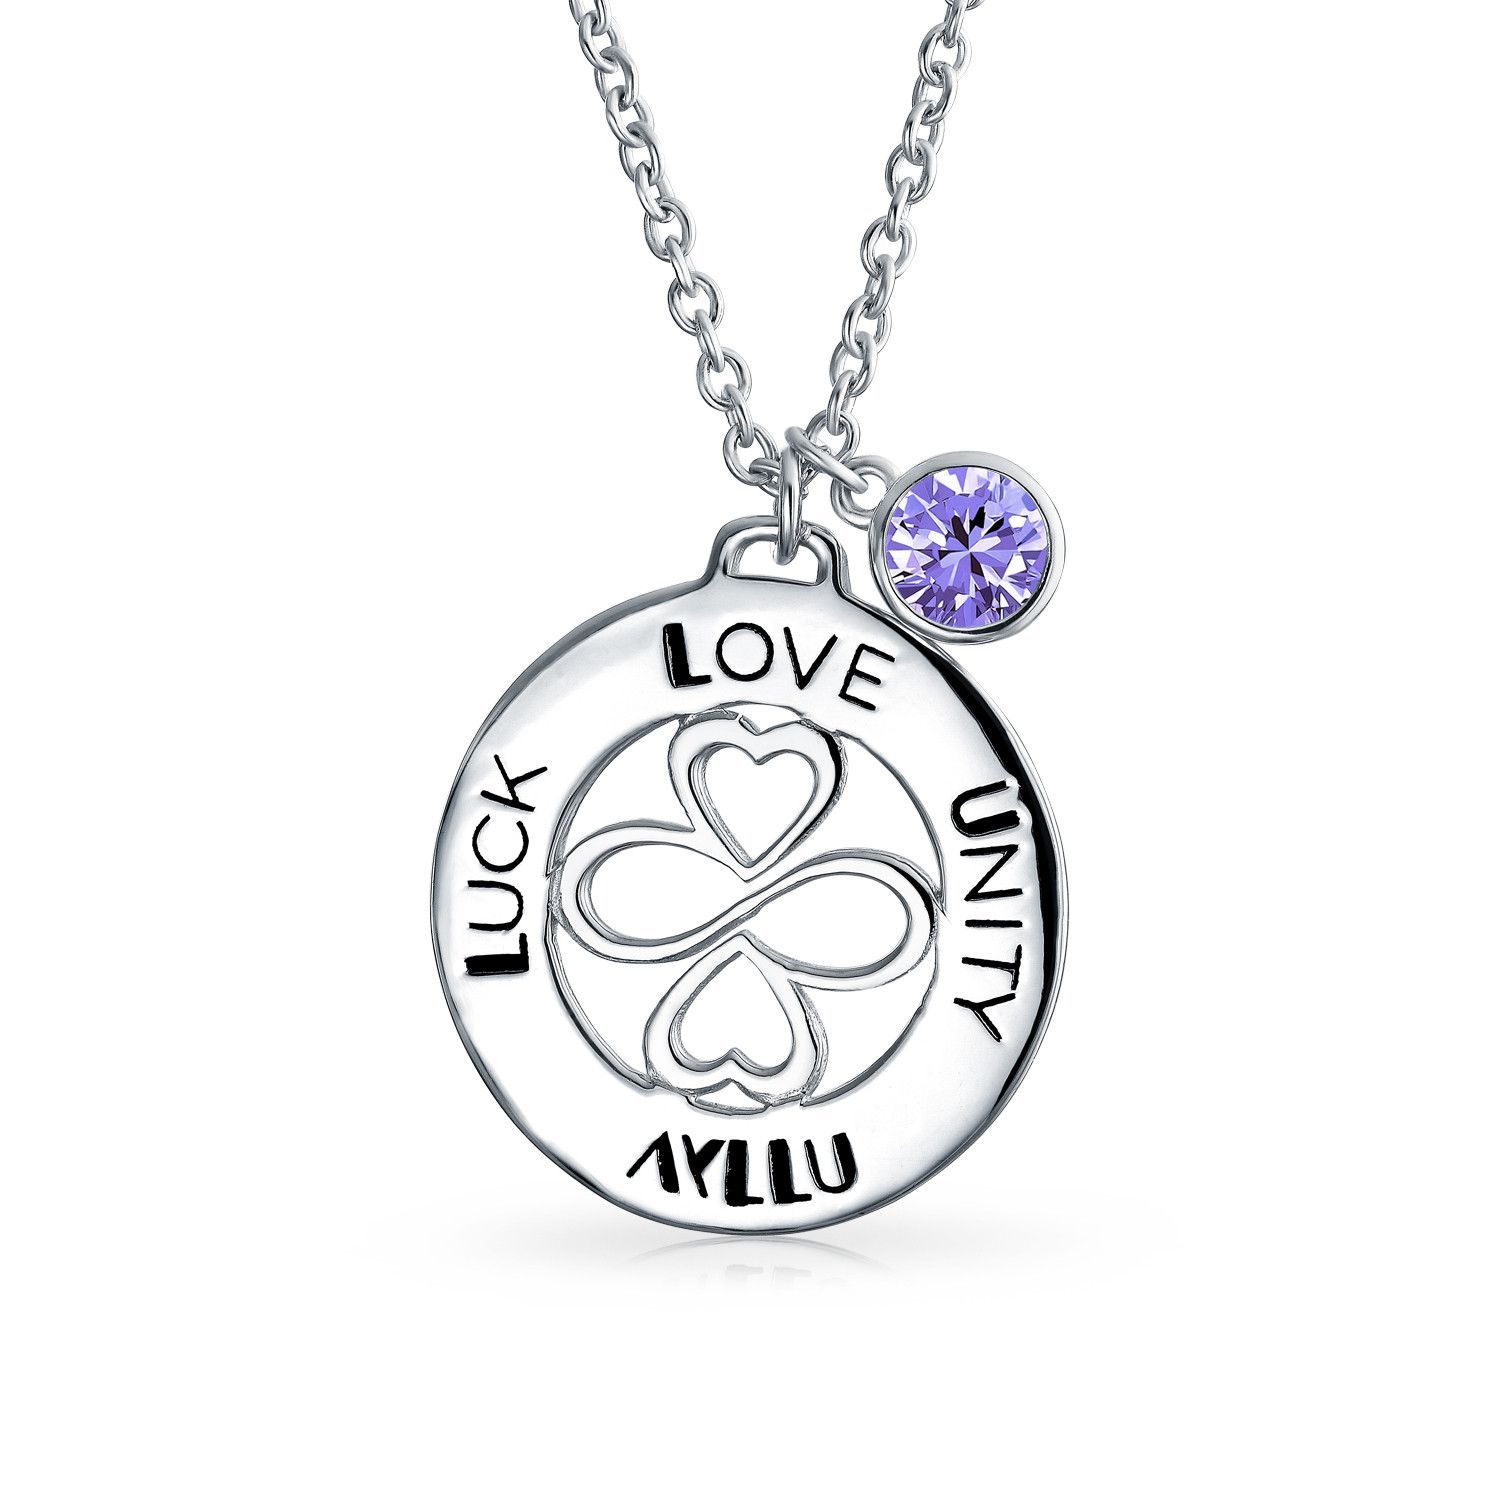 Ayllu Symbol Inspirational Round Disc Bff Pendant Necklace For Women Within Most Up To Date Purple February Birthstone Locket Element Necklaces (View 12 of 25)